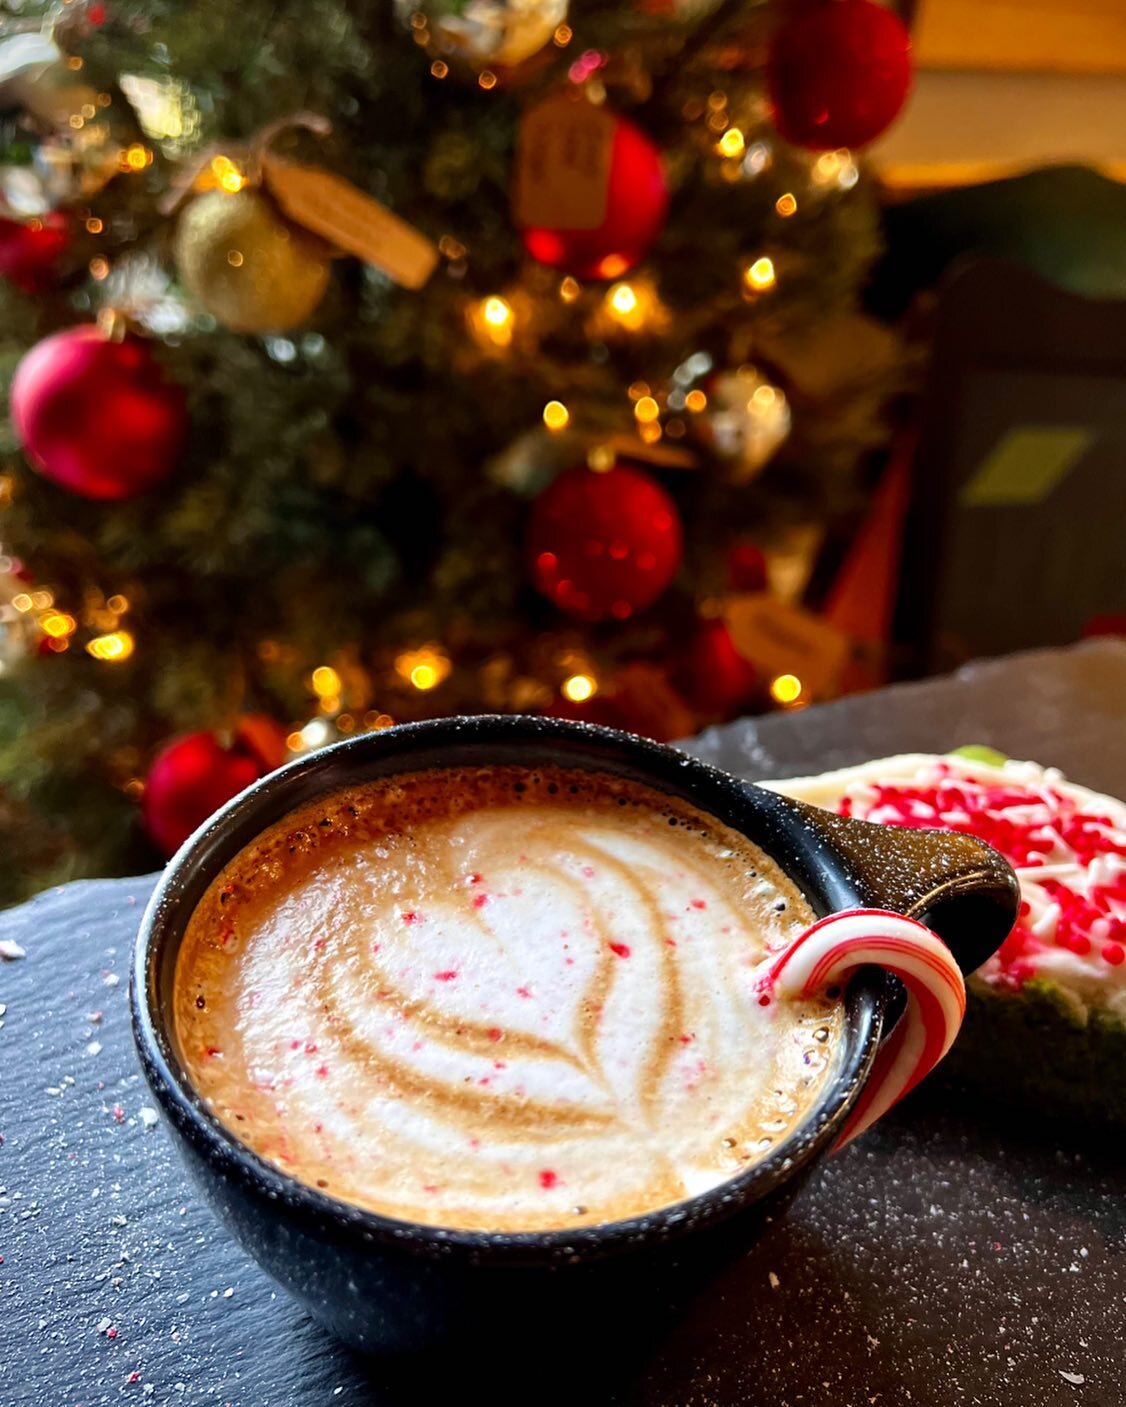 When your baker &amp; barista's are both artistic!​​​​​​​​
​​​​​​​​
What pairs best with our Barrel-Aged Peppermint Latte? ​​​​​​​​
We say the Sugar Cookie Bar made my the amazing crew @theusualfood2020